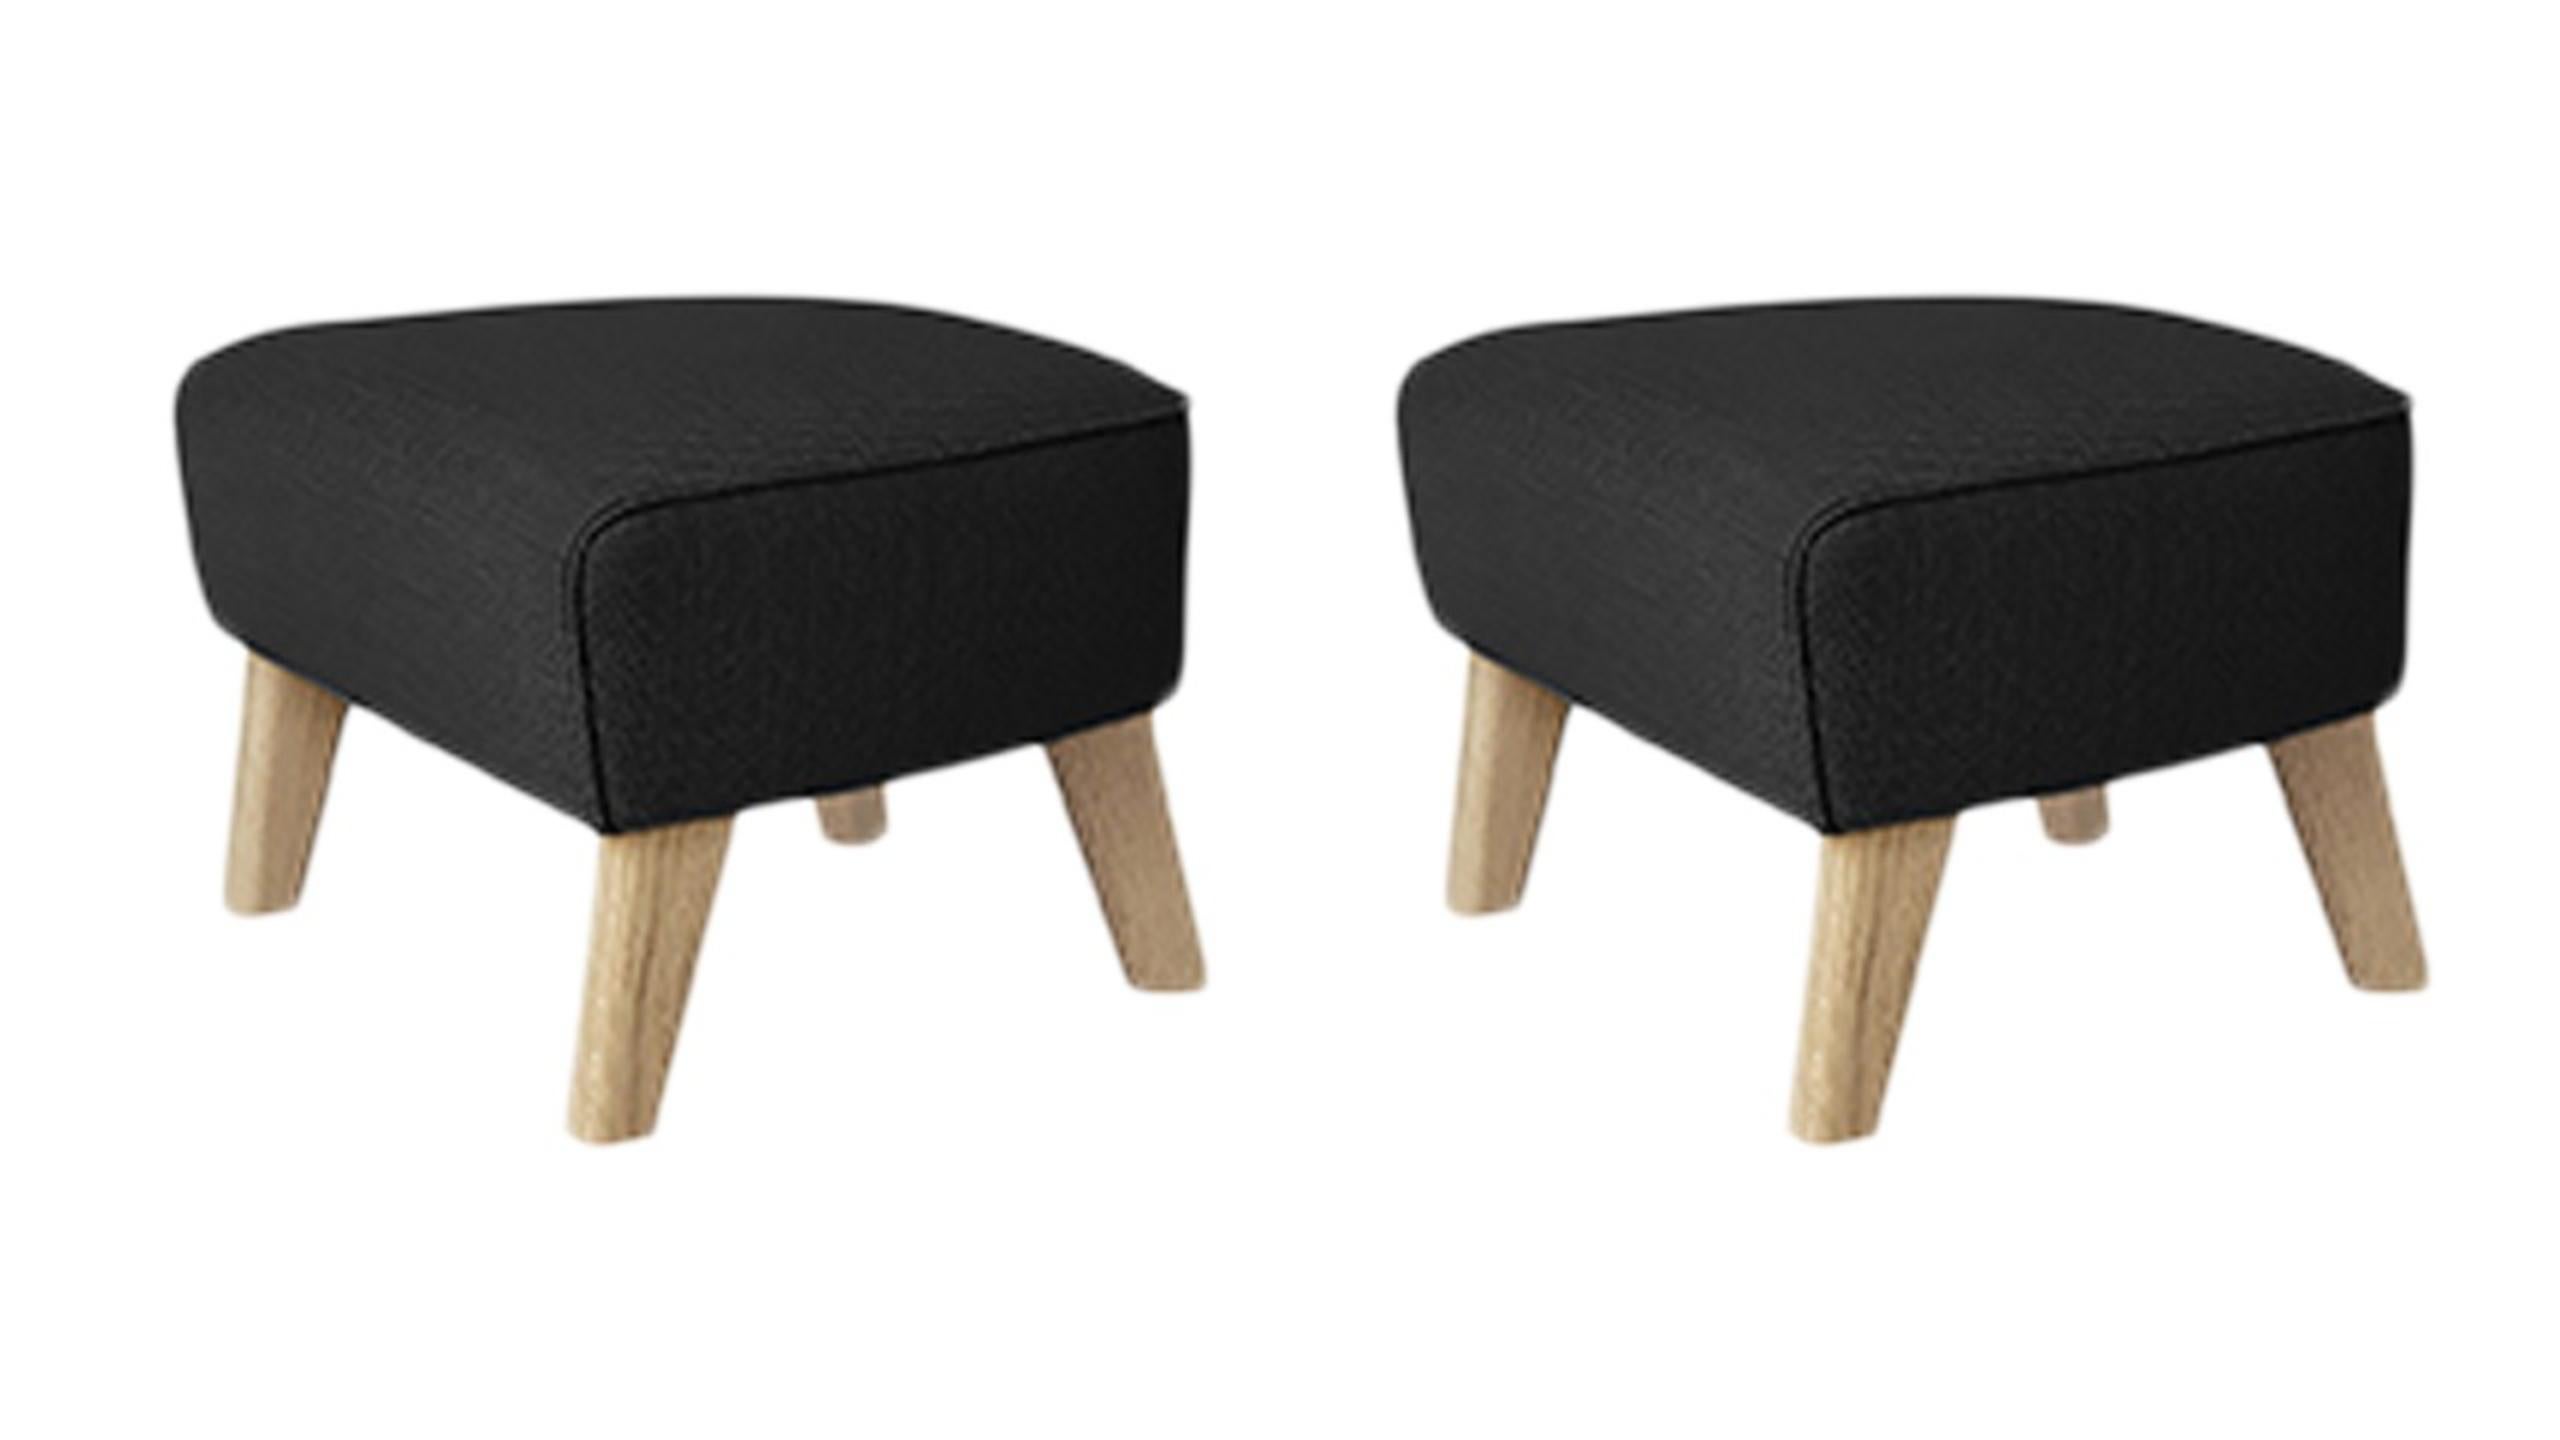 Set of 2 dark grey, natural oak Raf Simons Vidar 3 My Own Chair footstool by Lassen
Dimensions: w 56 x d 58 x h 40 cm 
Materials: textile, oak.
Also available: other colors available.

The My Own Chair footstool has been designed in the same